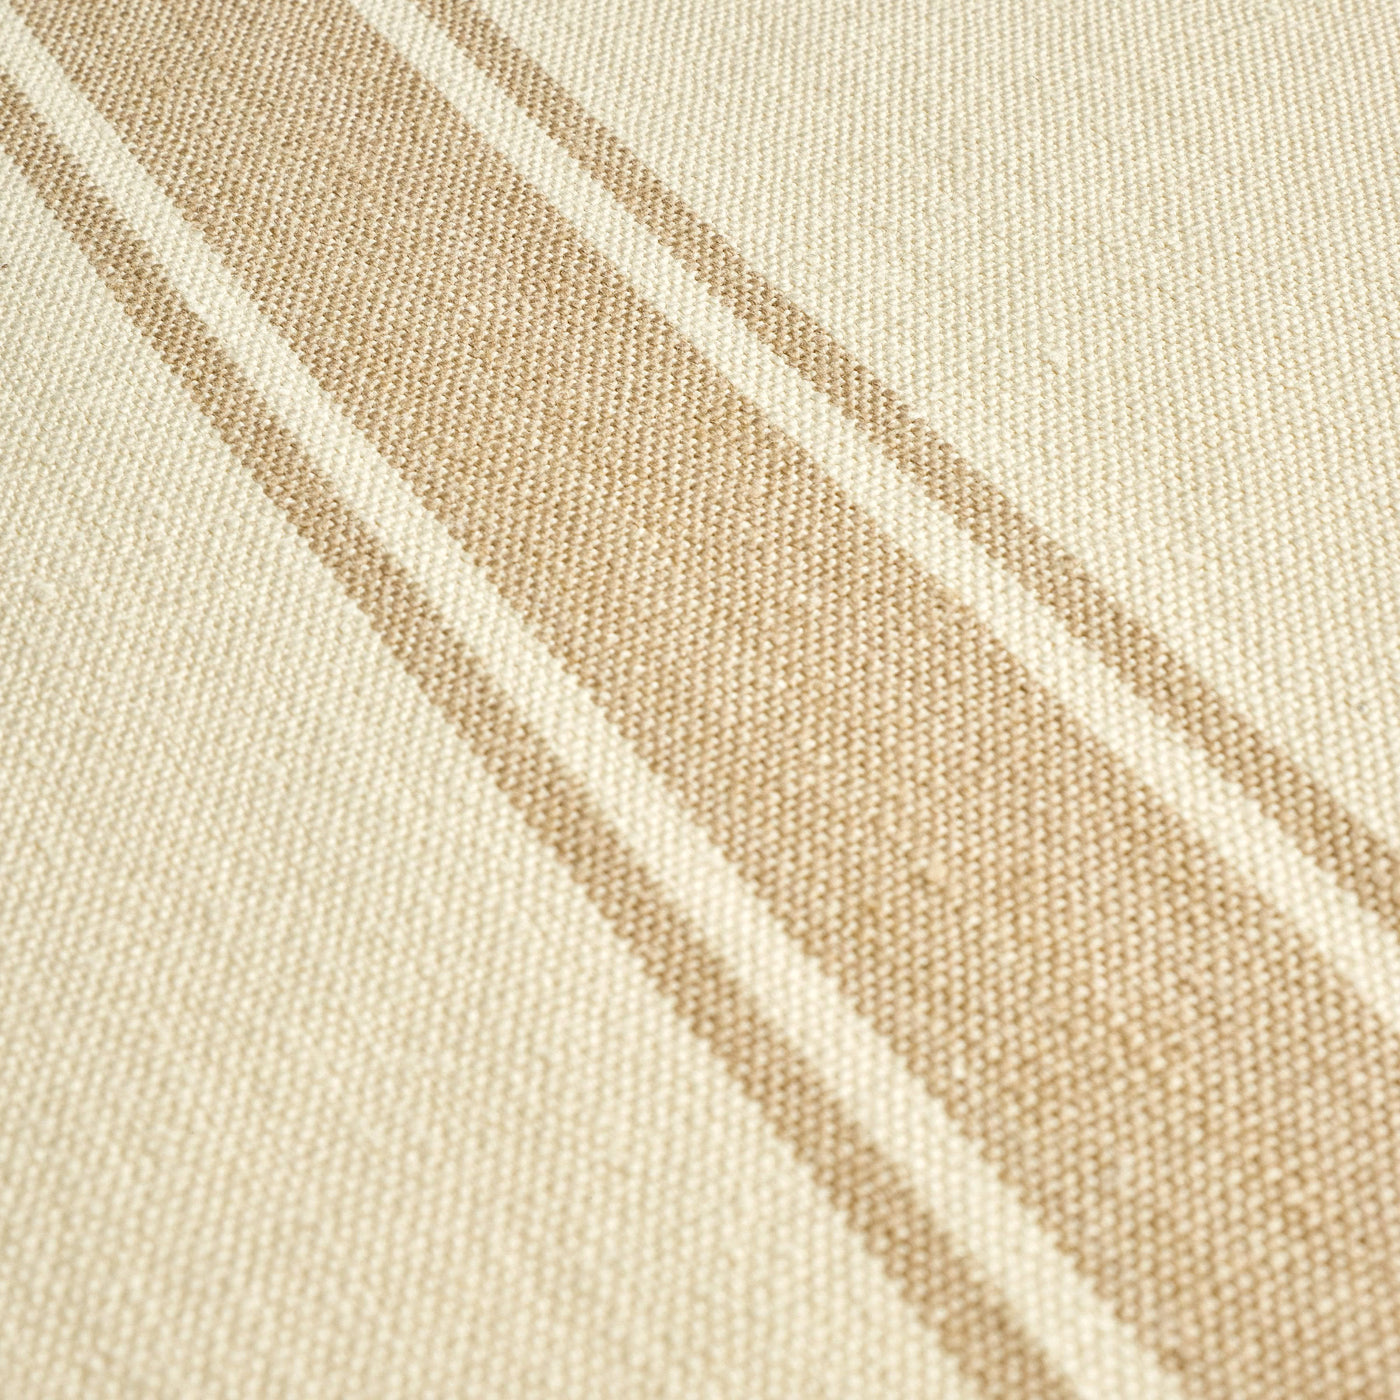 Mary Set of 2 Striped Placemats, Natural - Beige, 35x46 cm 4